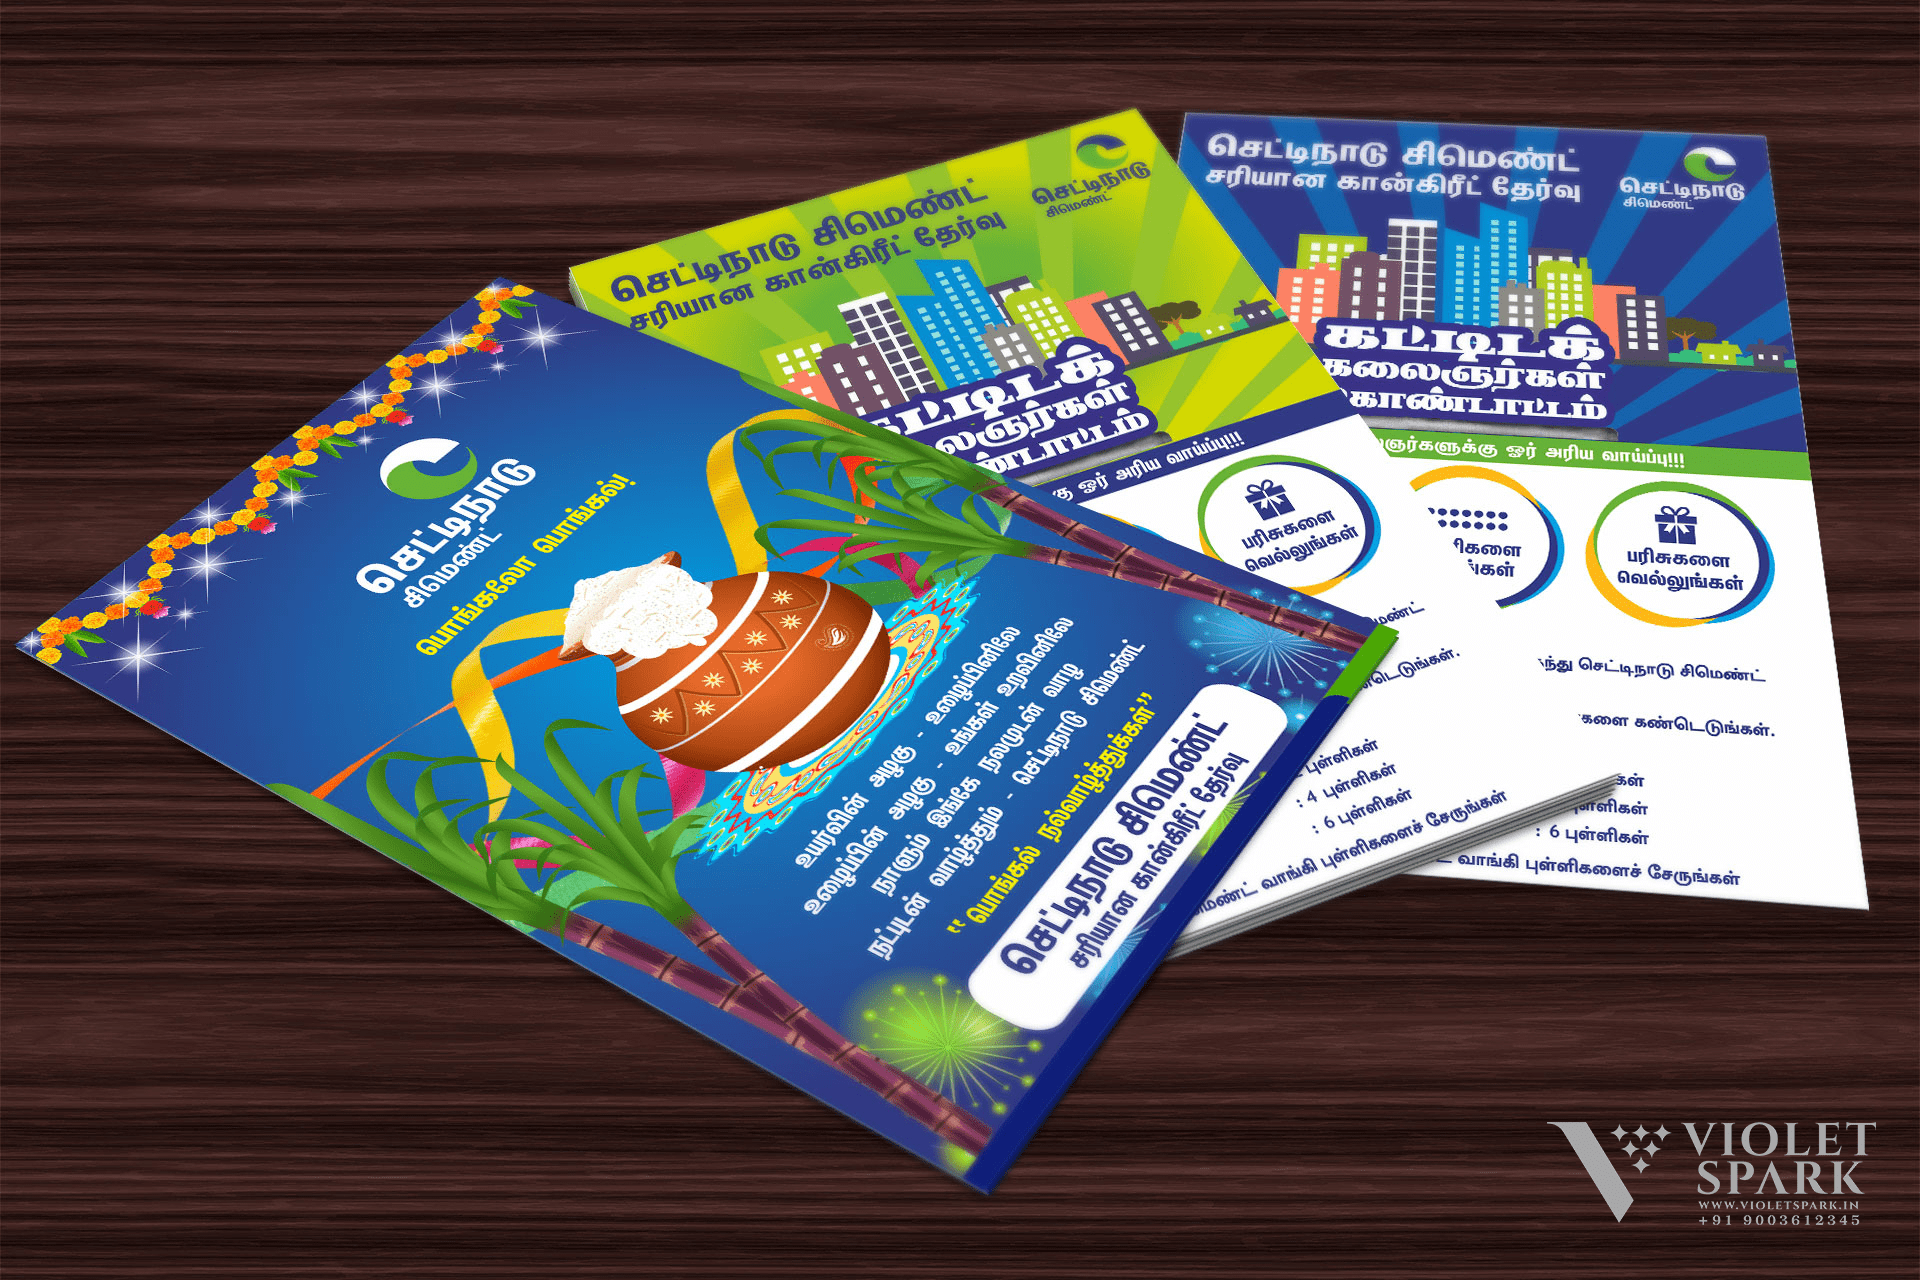 Chettinad Cement Flyers Branding Packaging Design Digital Marketing in Chennai by Creative Prints thecreativeprints